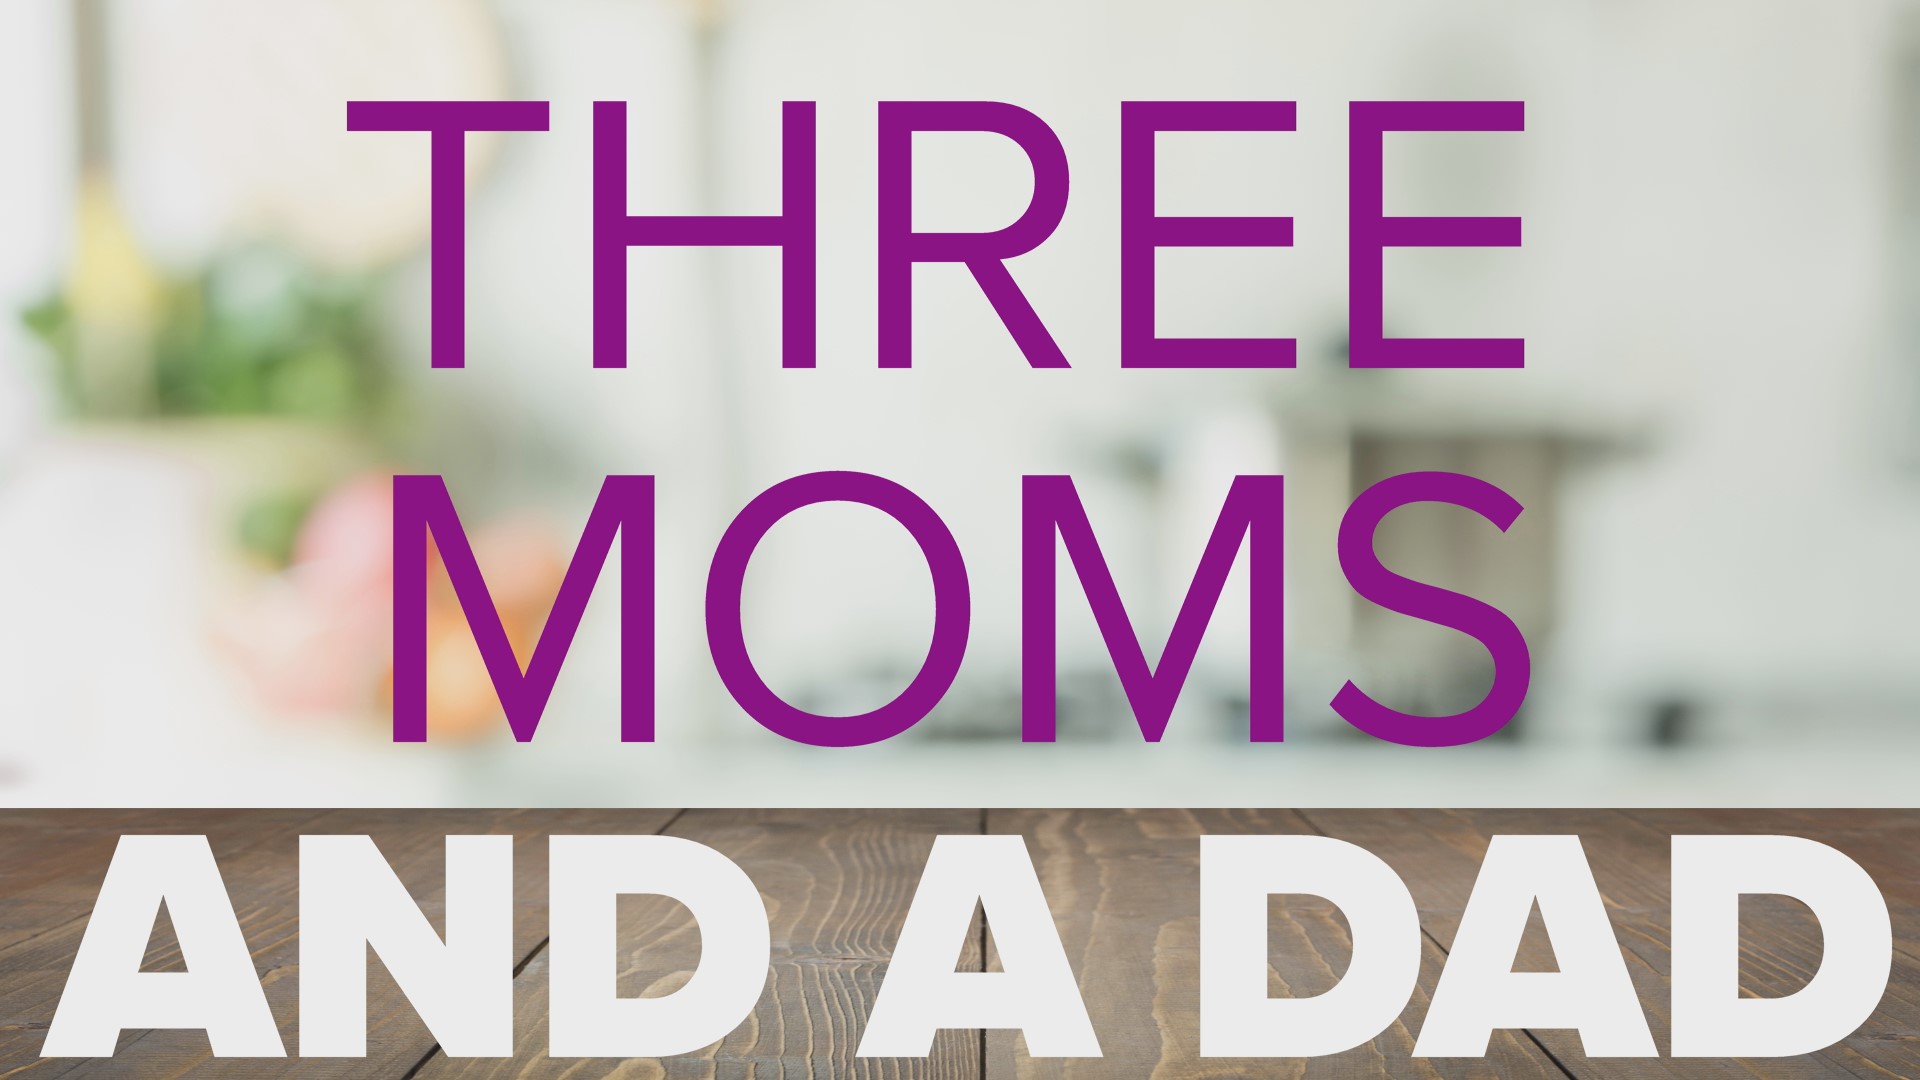 Ever wonder if you’re doing the right thing when it comes to disciplining your children? Well, you’re not alone. "Three Moms and a Dad" really dive into the topic of discipline, what does it really mean, what works and what doesn't.